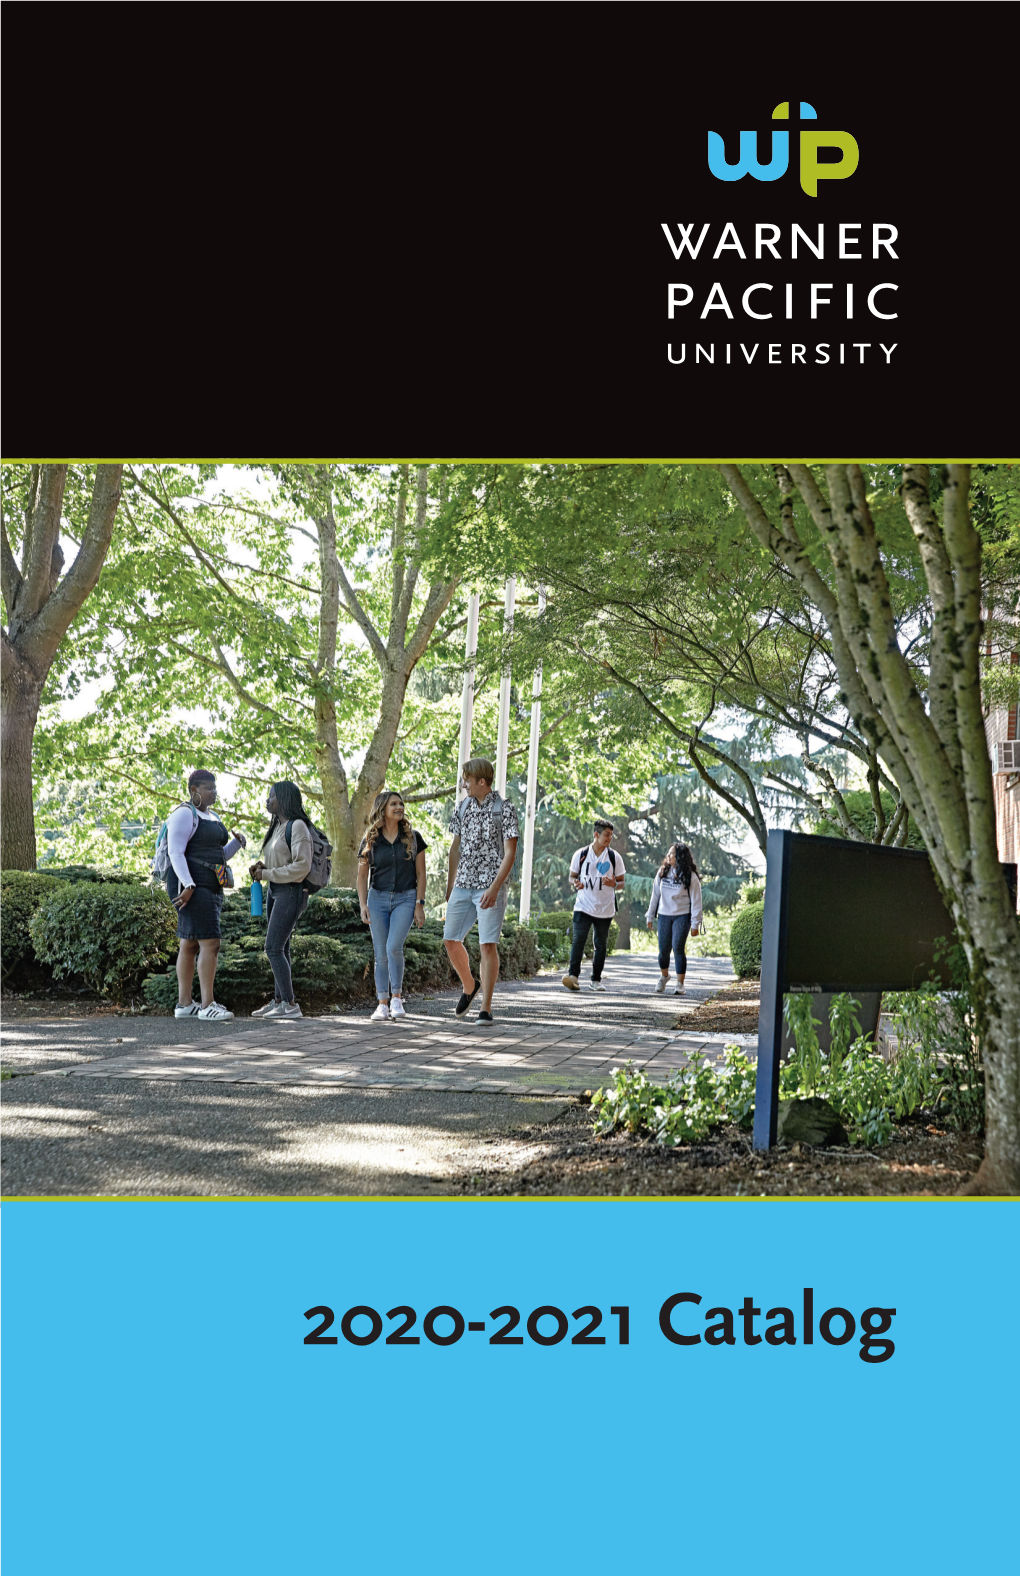 2020-2021 Catalog Welcome Welcome to Warner Pacific University! the 2020-2021 Academic Year Will Be Undertaken During a Period of Unprecedented Times